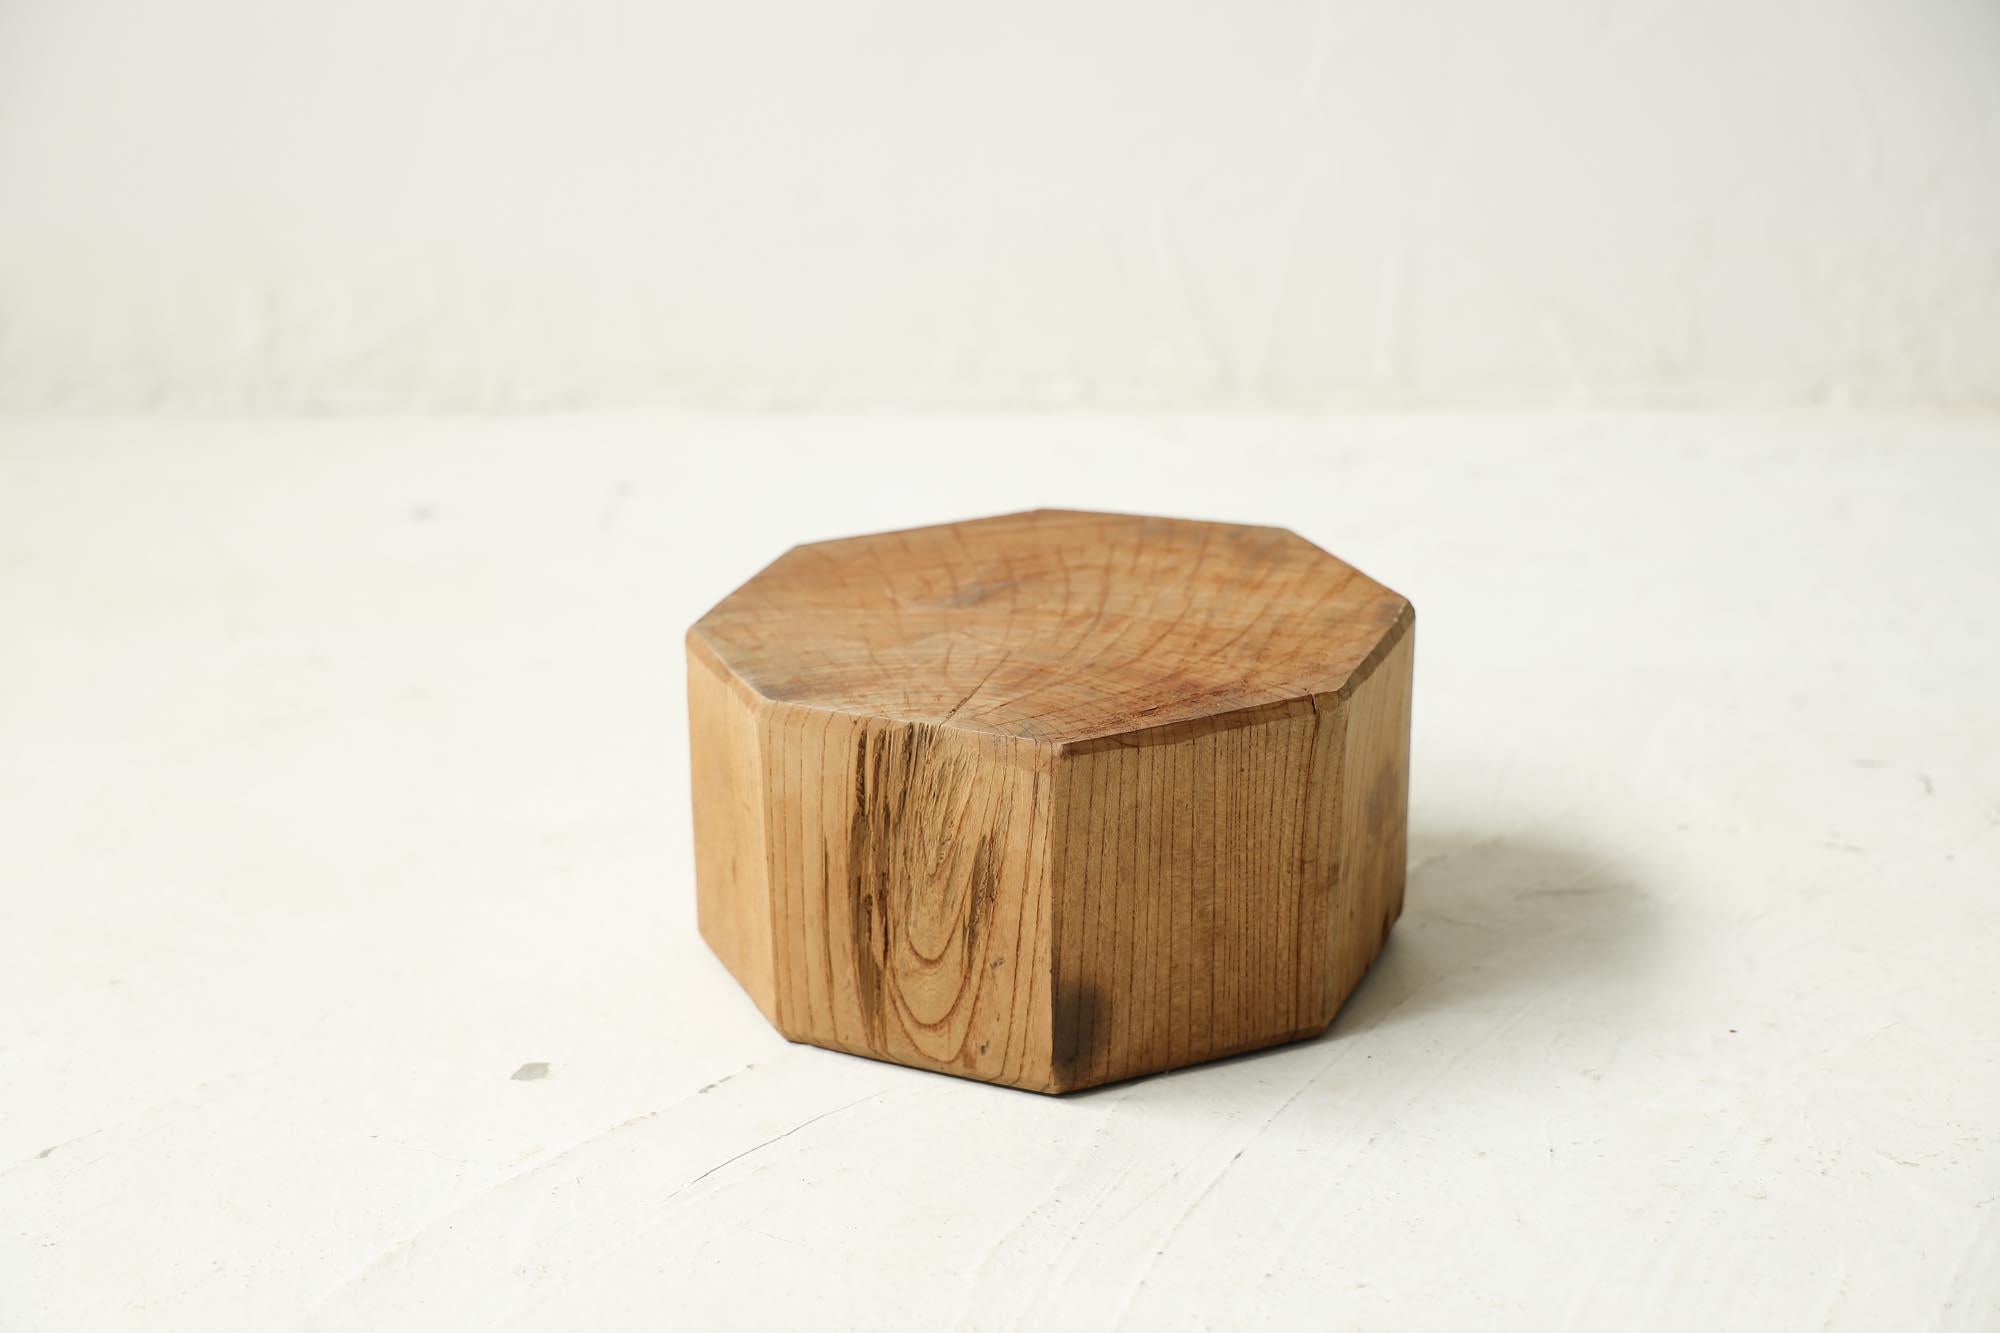 This is a Japanese display stand.
The Material is zelkova, a wood unique to Japan.
It is a very rare item.

It is finished by a craftsman using a plane.

The grain of the wood is elegant and beautiful.
The aged color of the wood is also